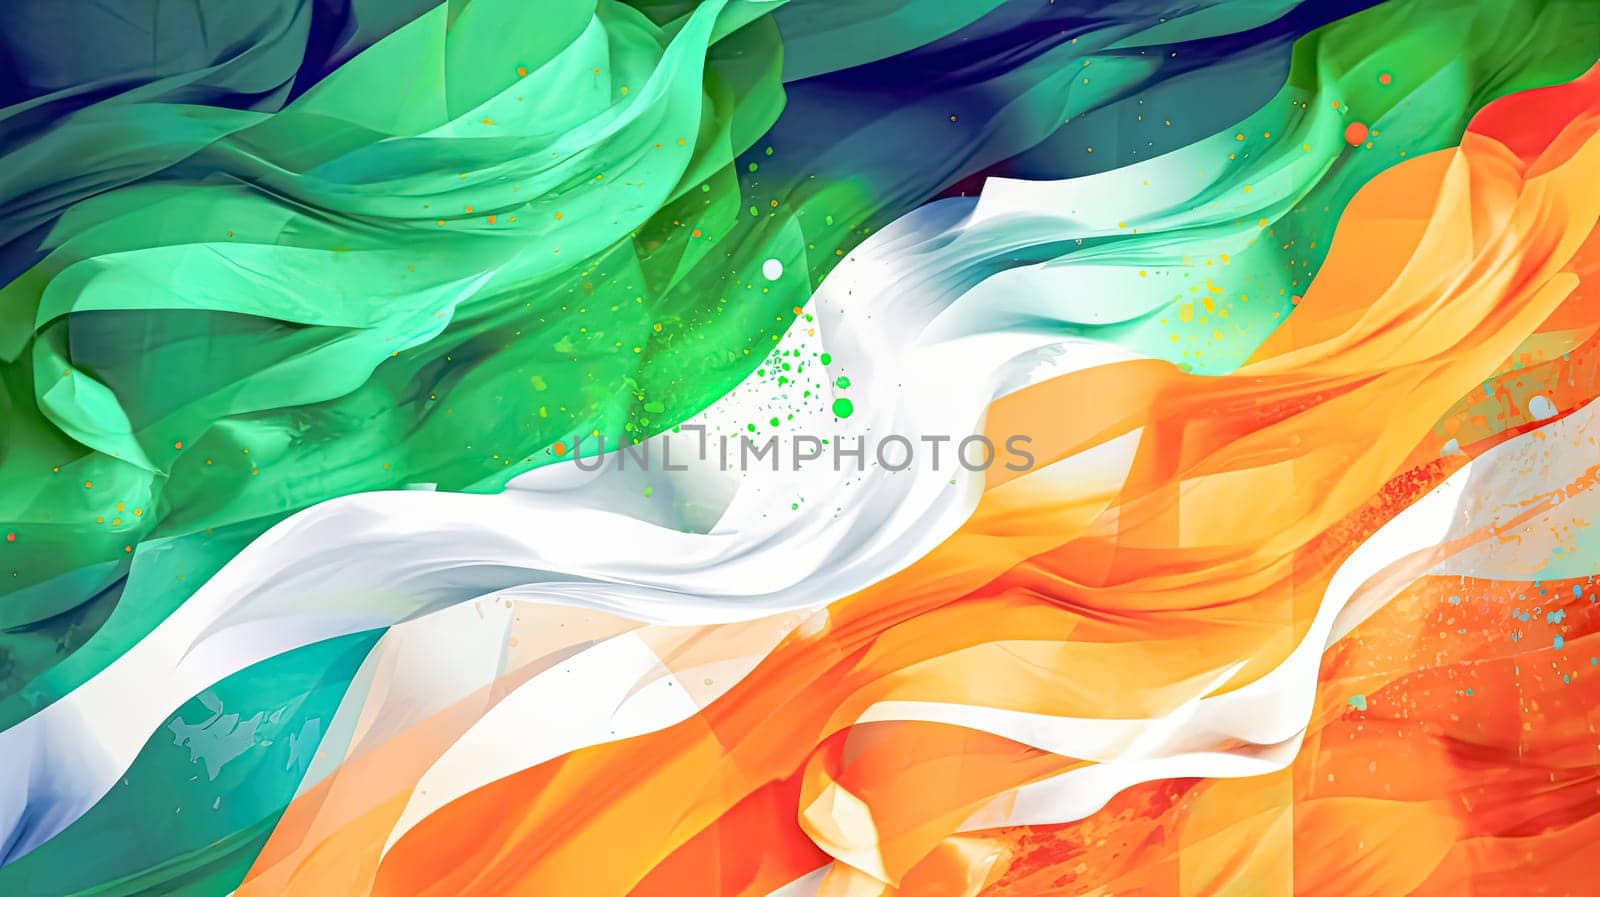 Watercolor abstract of the Ireland flag by Alla_Morozova93